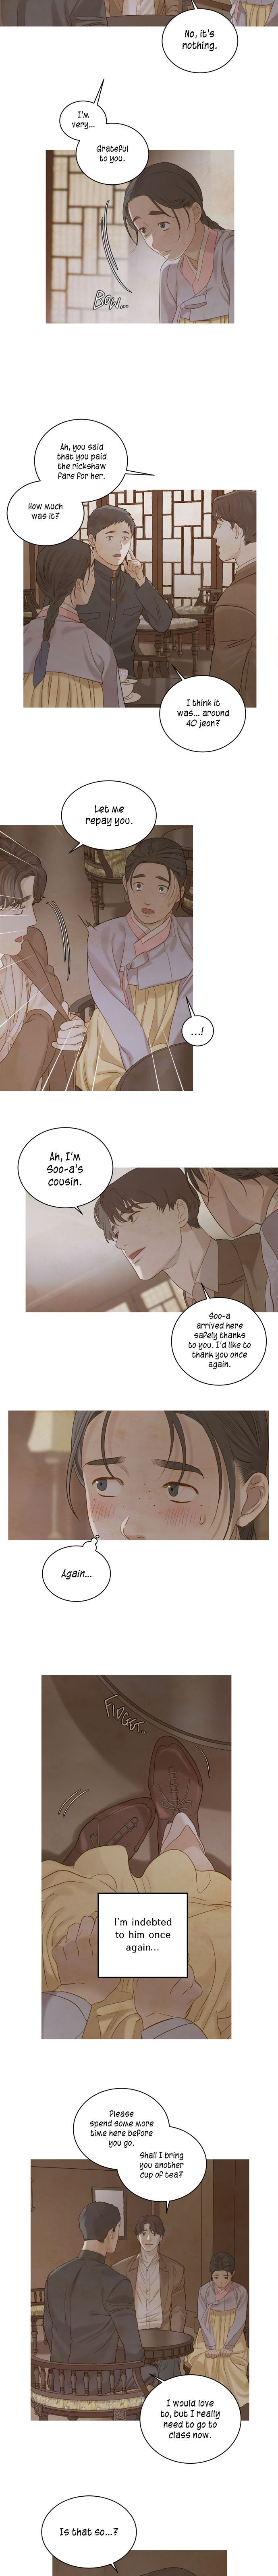 Gorae Byul - The Gyeongseong Mermaid - Chapter 29 Page 6